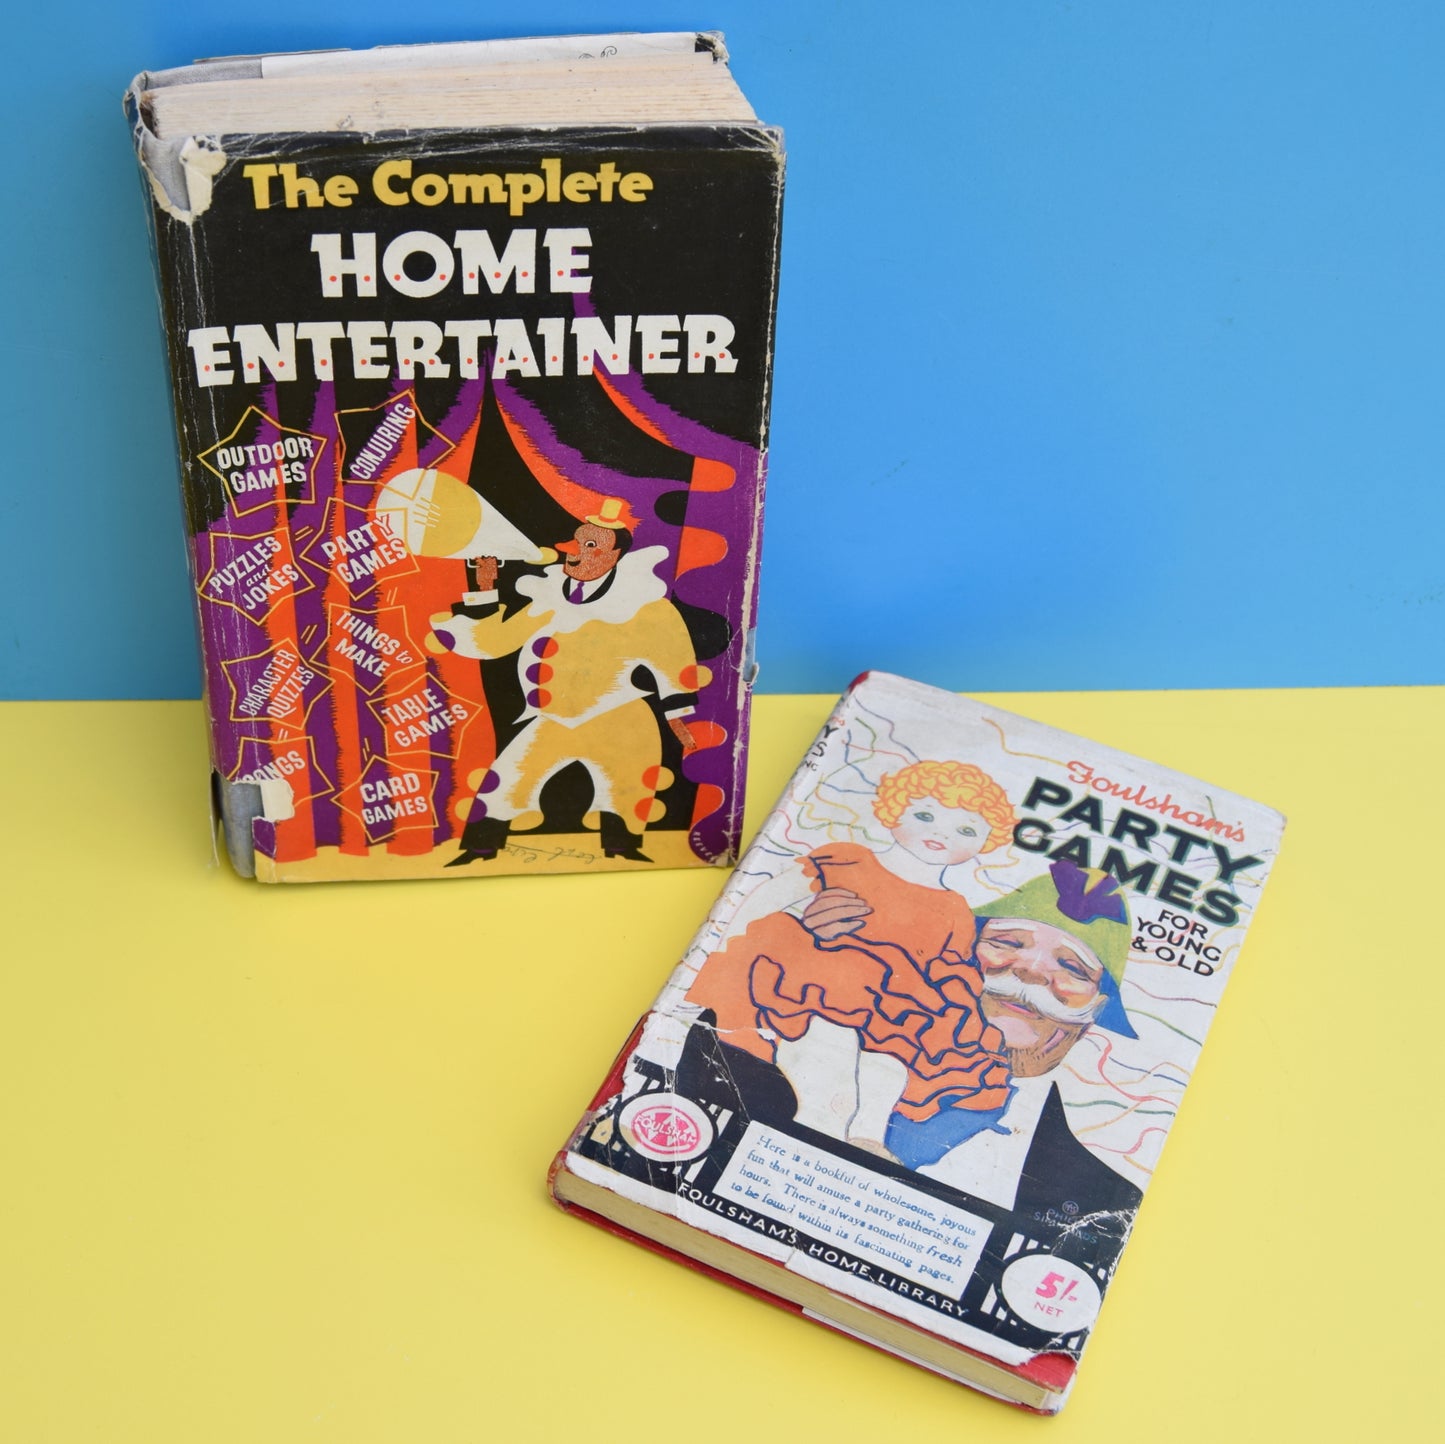 Vintage 1950s Party Games / The Complete Home Entertainer Books